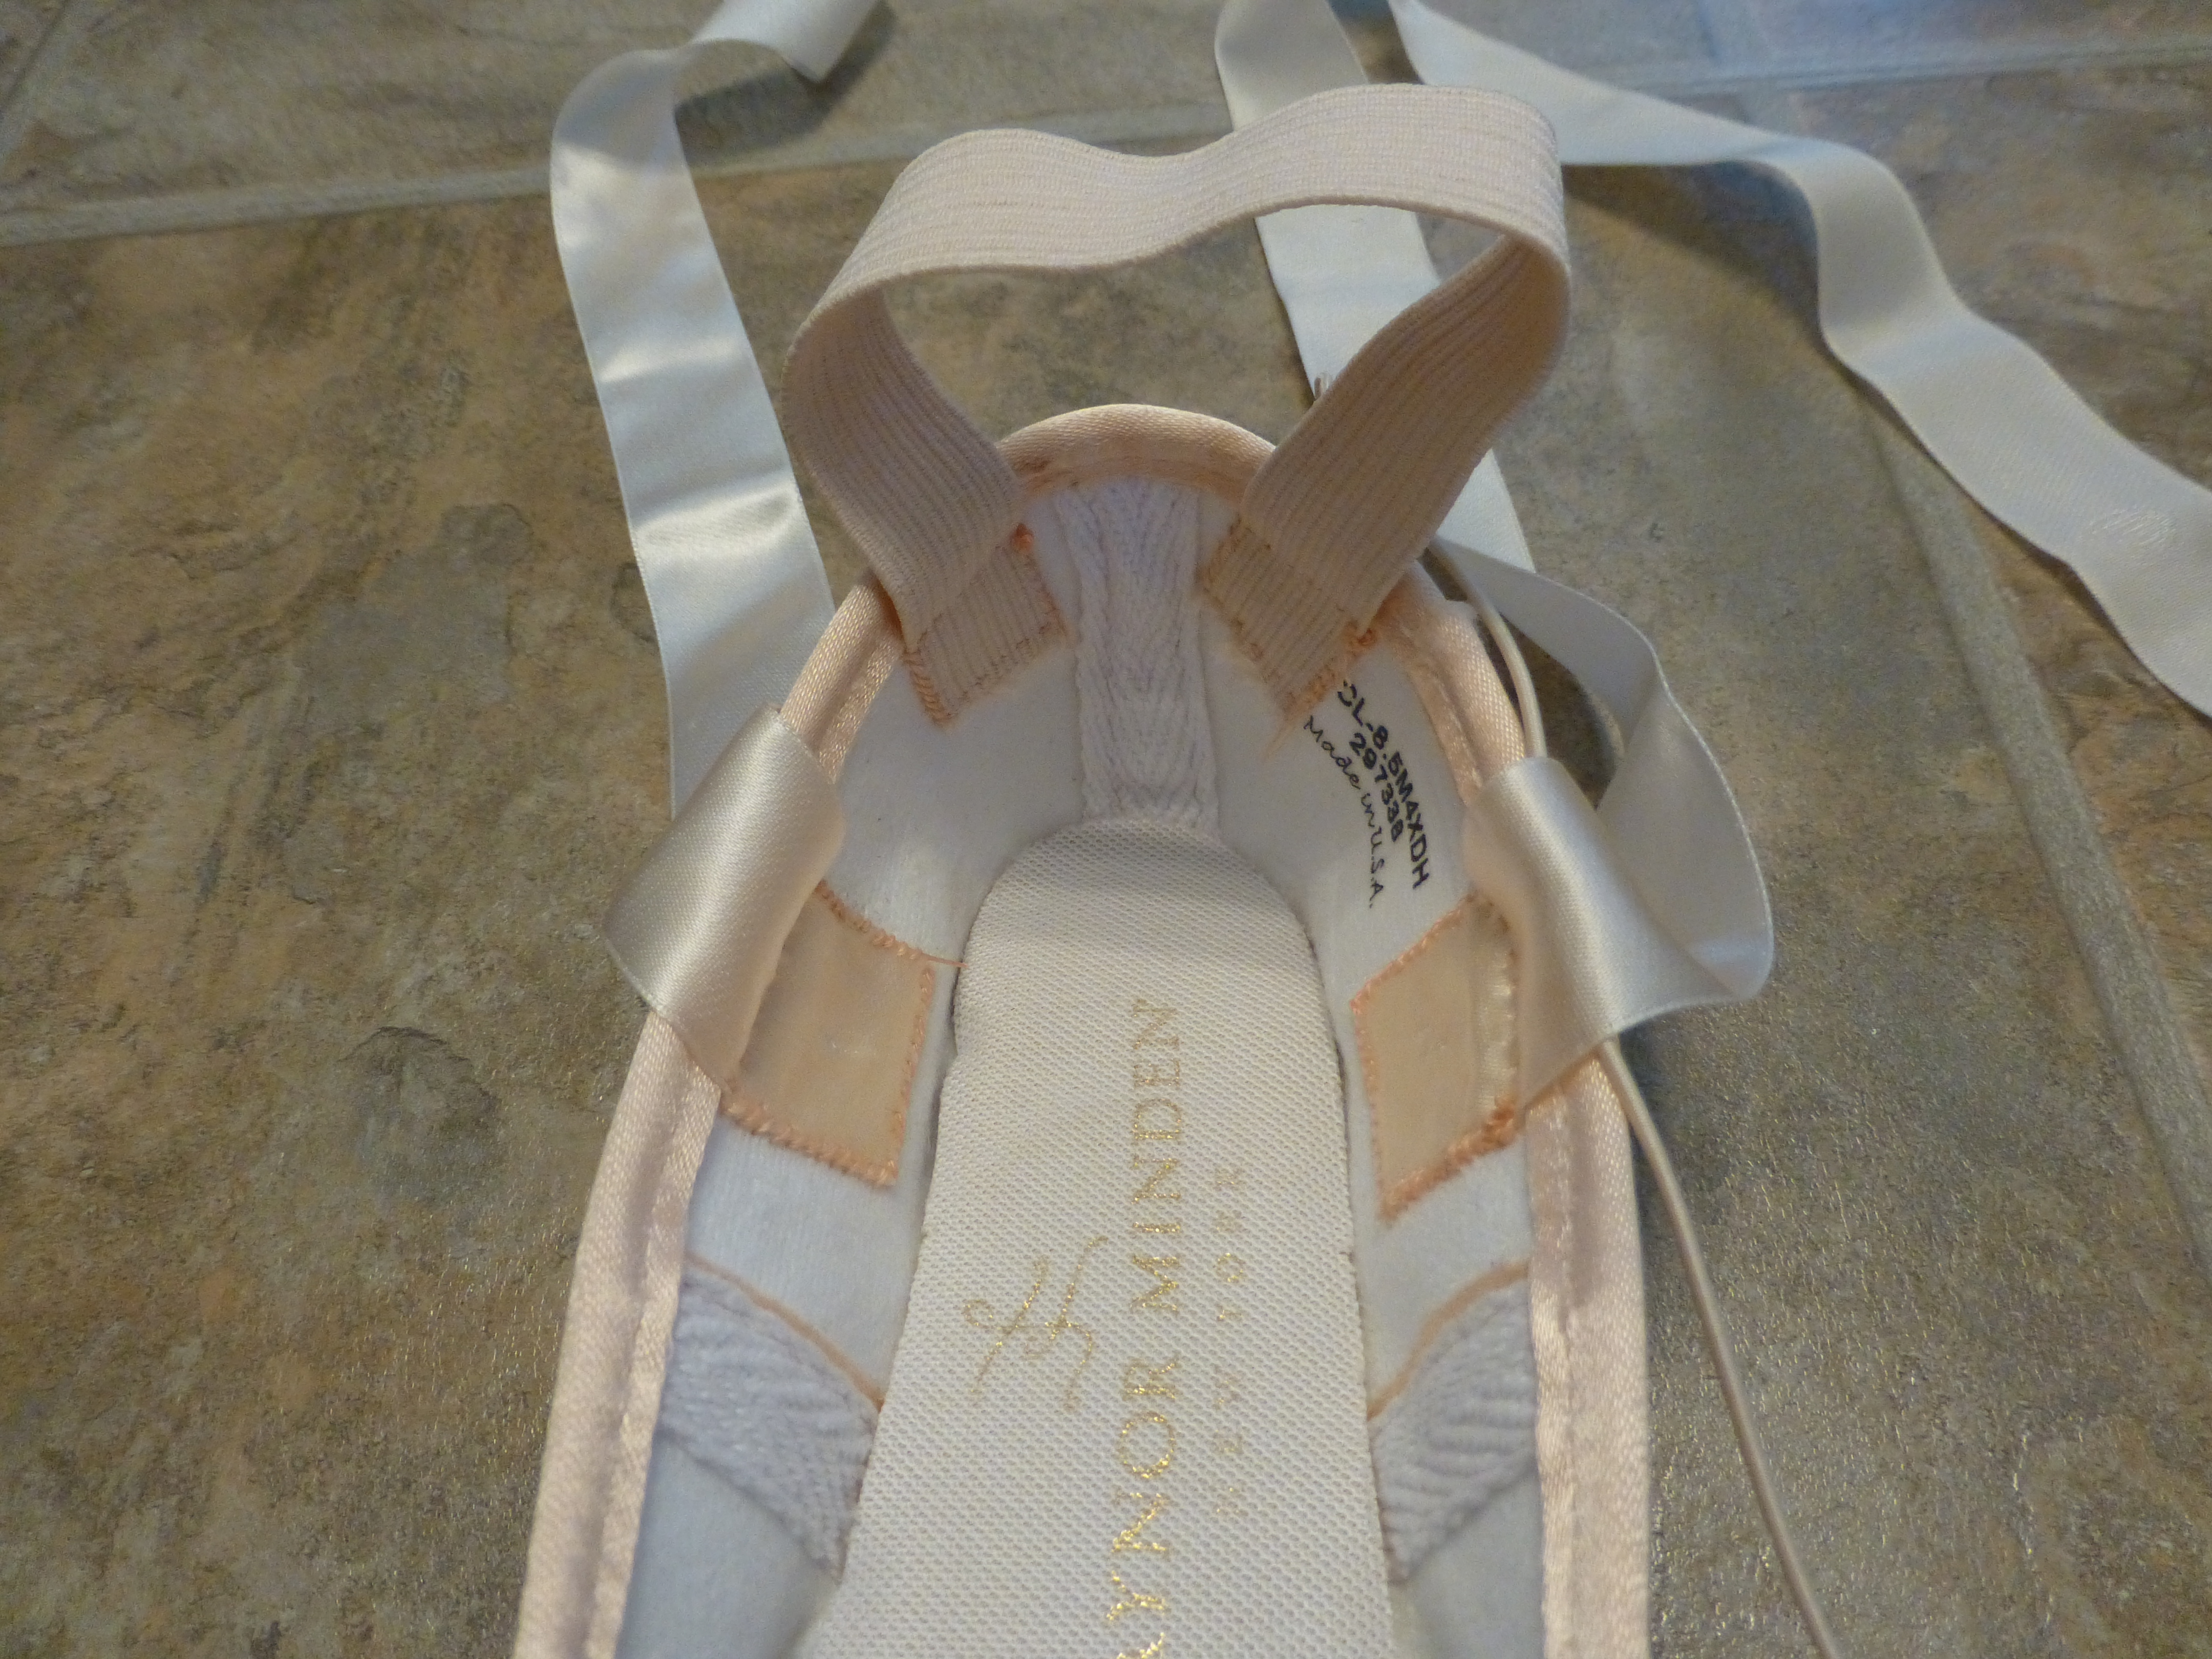 Finished pointe shoe